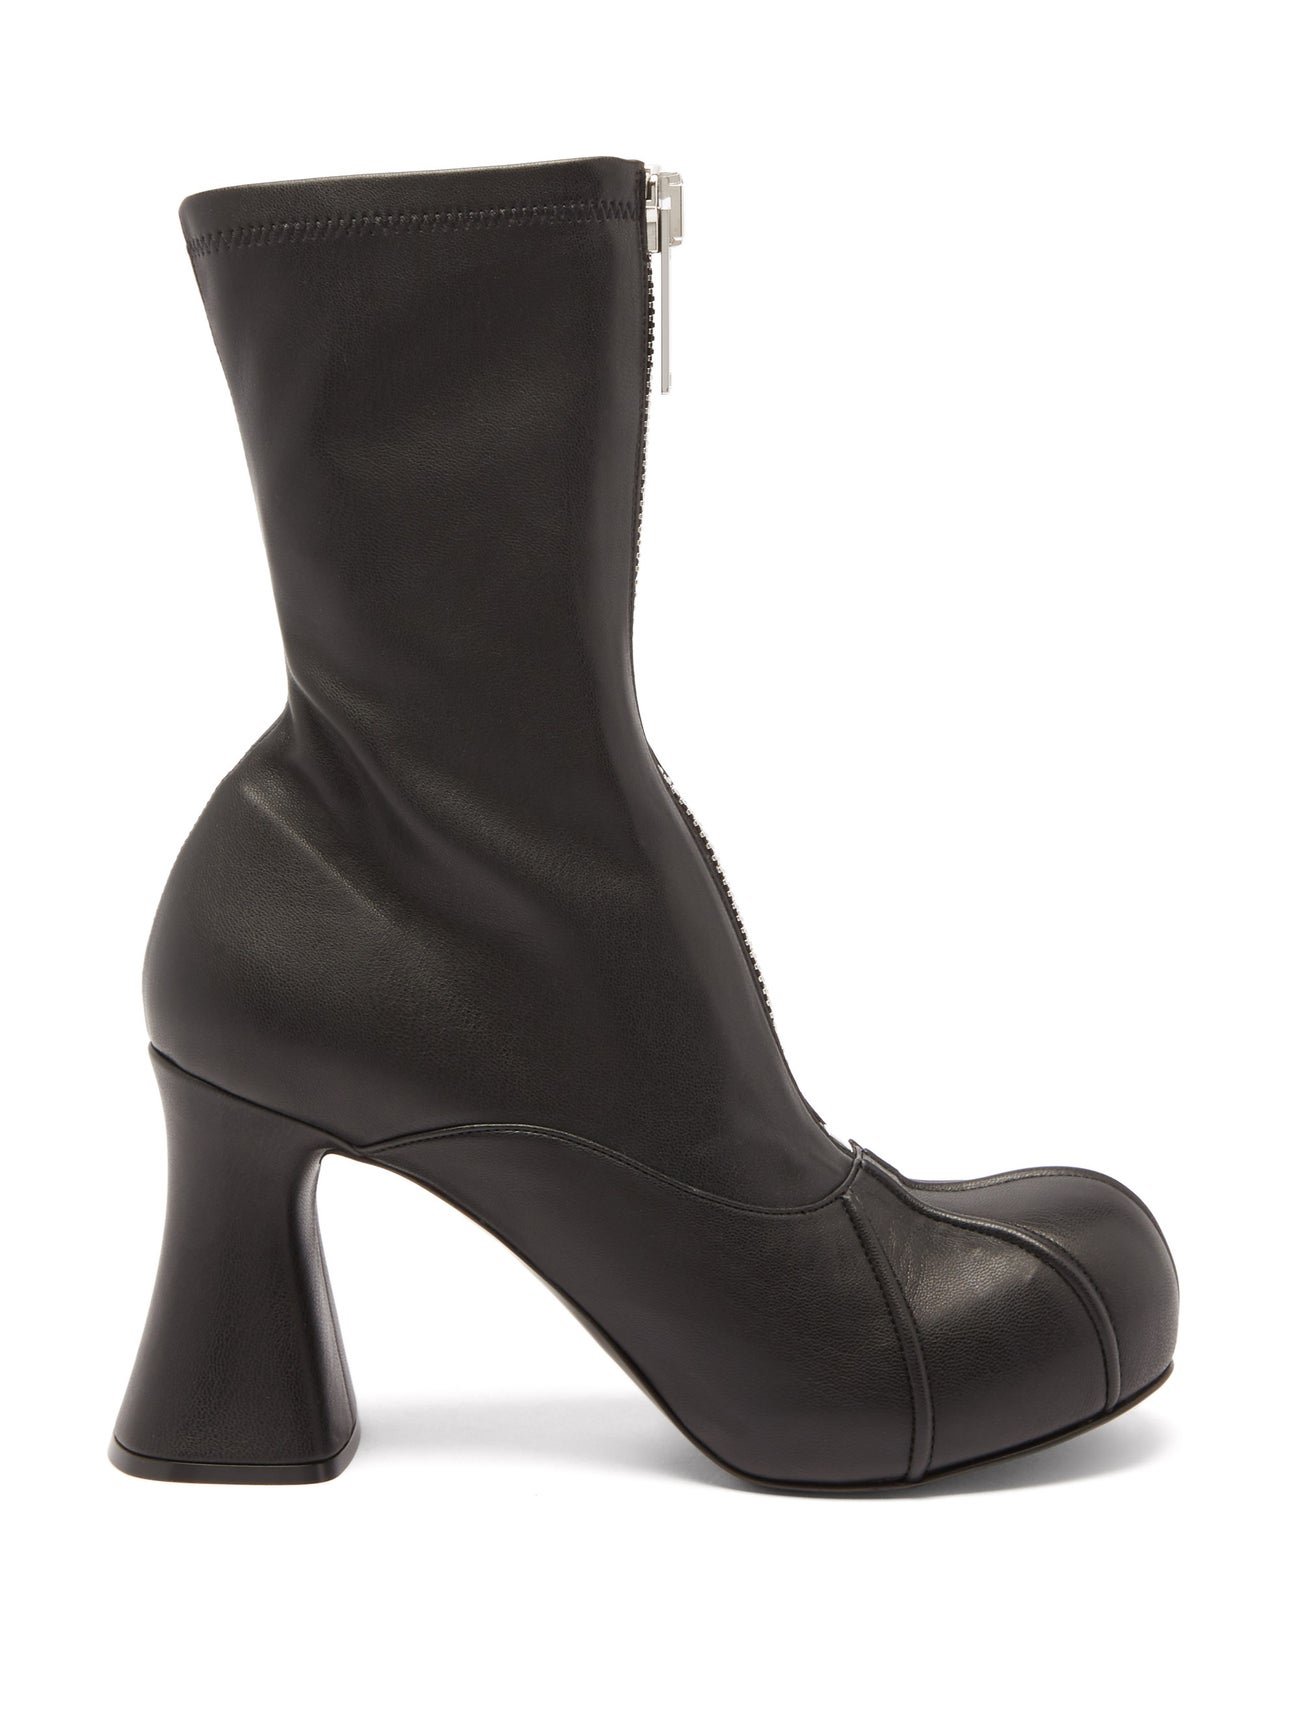 STELLA MCCARTNEY Groove Zipped Platform Ankle Boots in Black